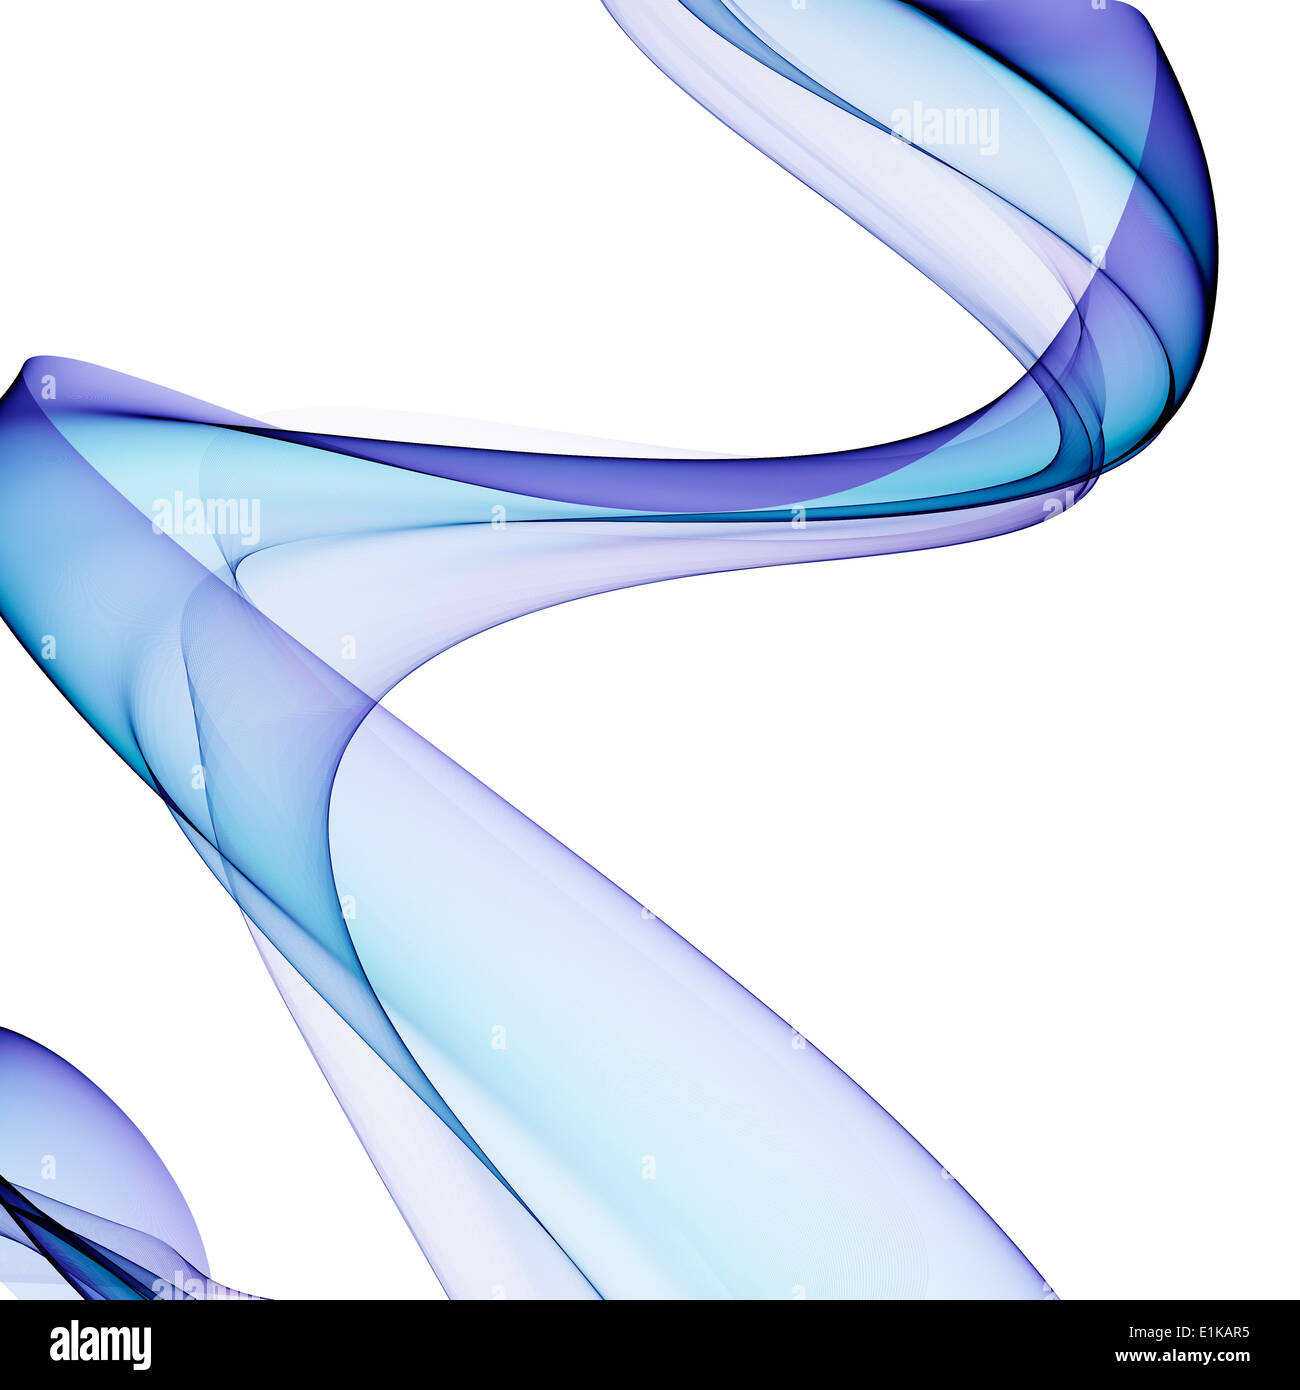 Blue abstract patterns against white background computer artwork. Stock Photo